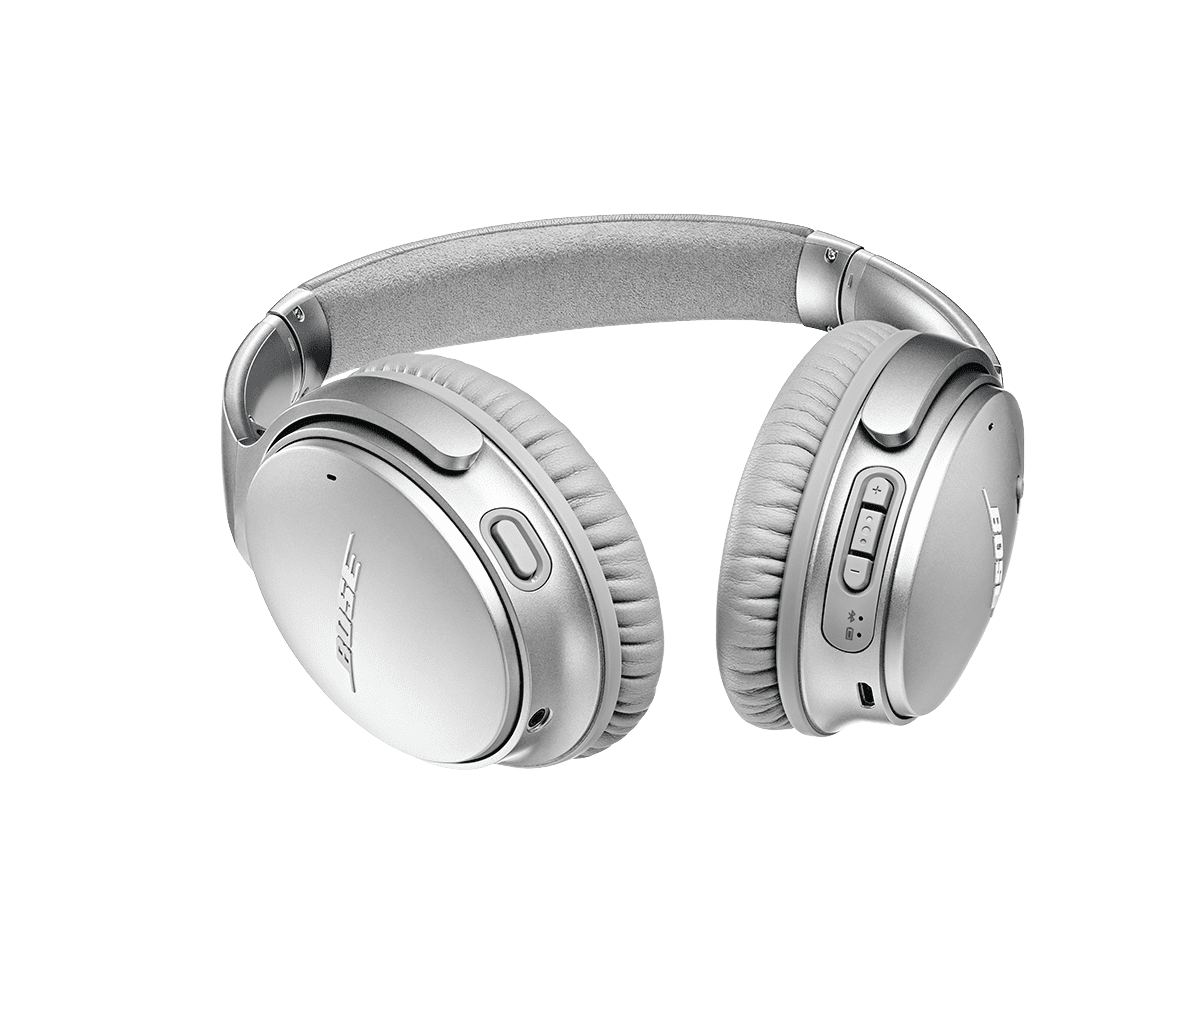 Bose QuietComfort 35 Noise Cancelling Bluetooth Over-Ear